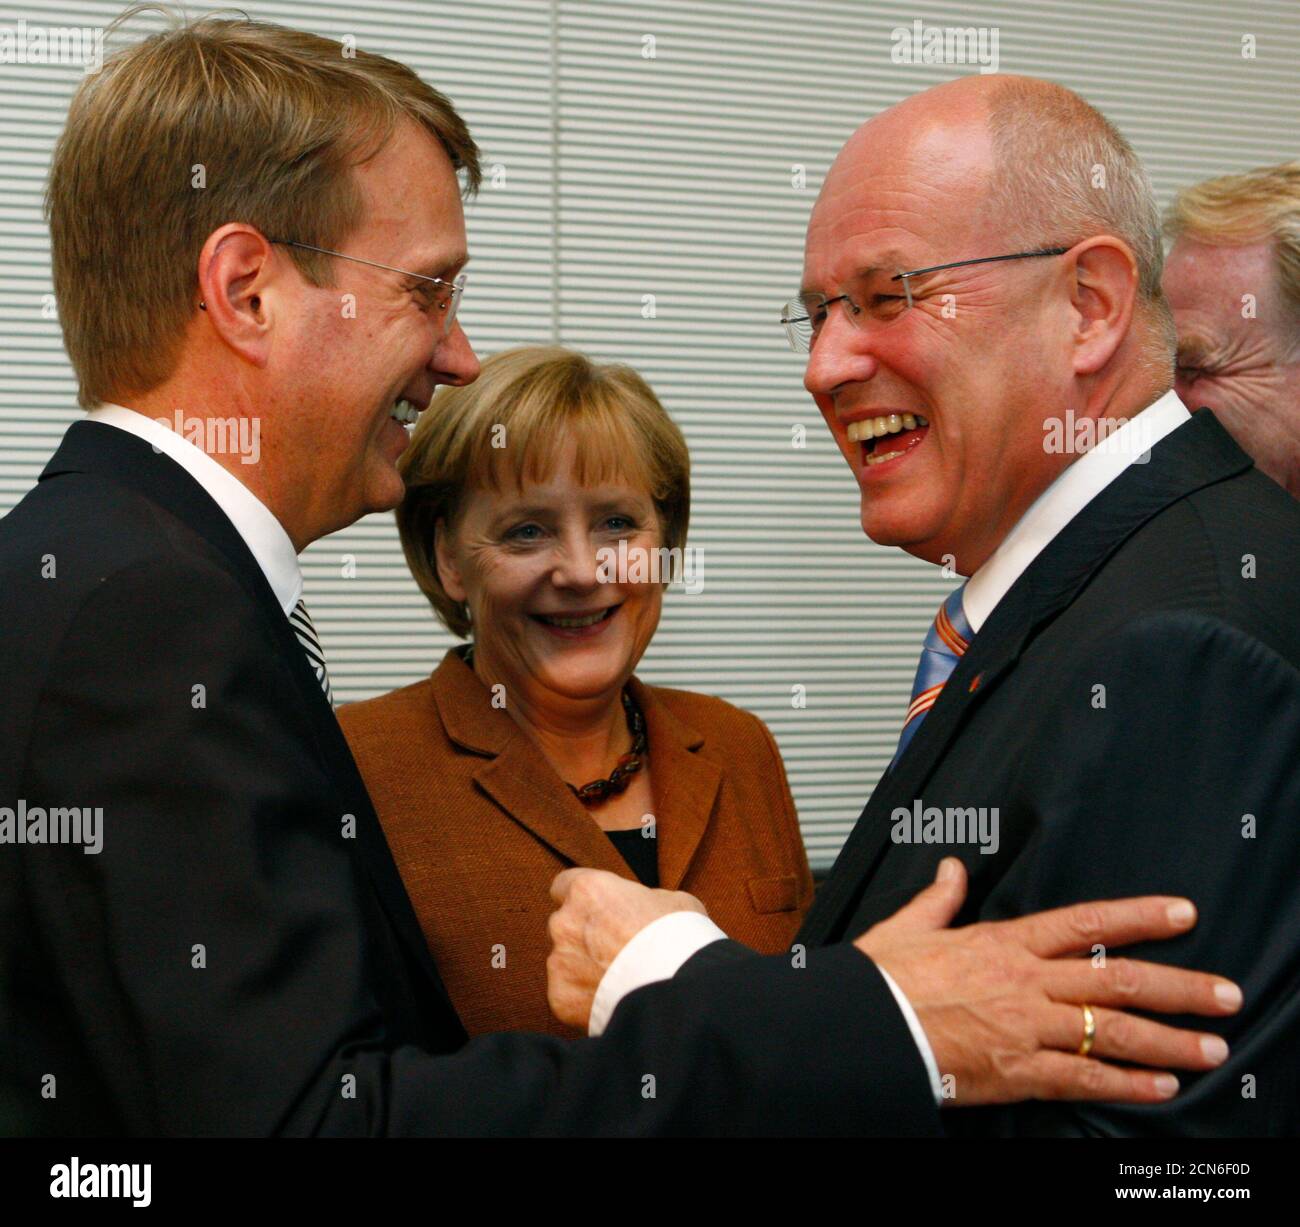 General Secretary Ronald Pofalla, leader and German Chancellor Angela Merkel and Volker Kauder of the conservative Christian Democratic union (CDU) talk before a meeting of the CDU parliamentary group in Berlin September 29, 2009.  REUTERS/Thomas Peter (GERMANY) Stock Photo